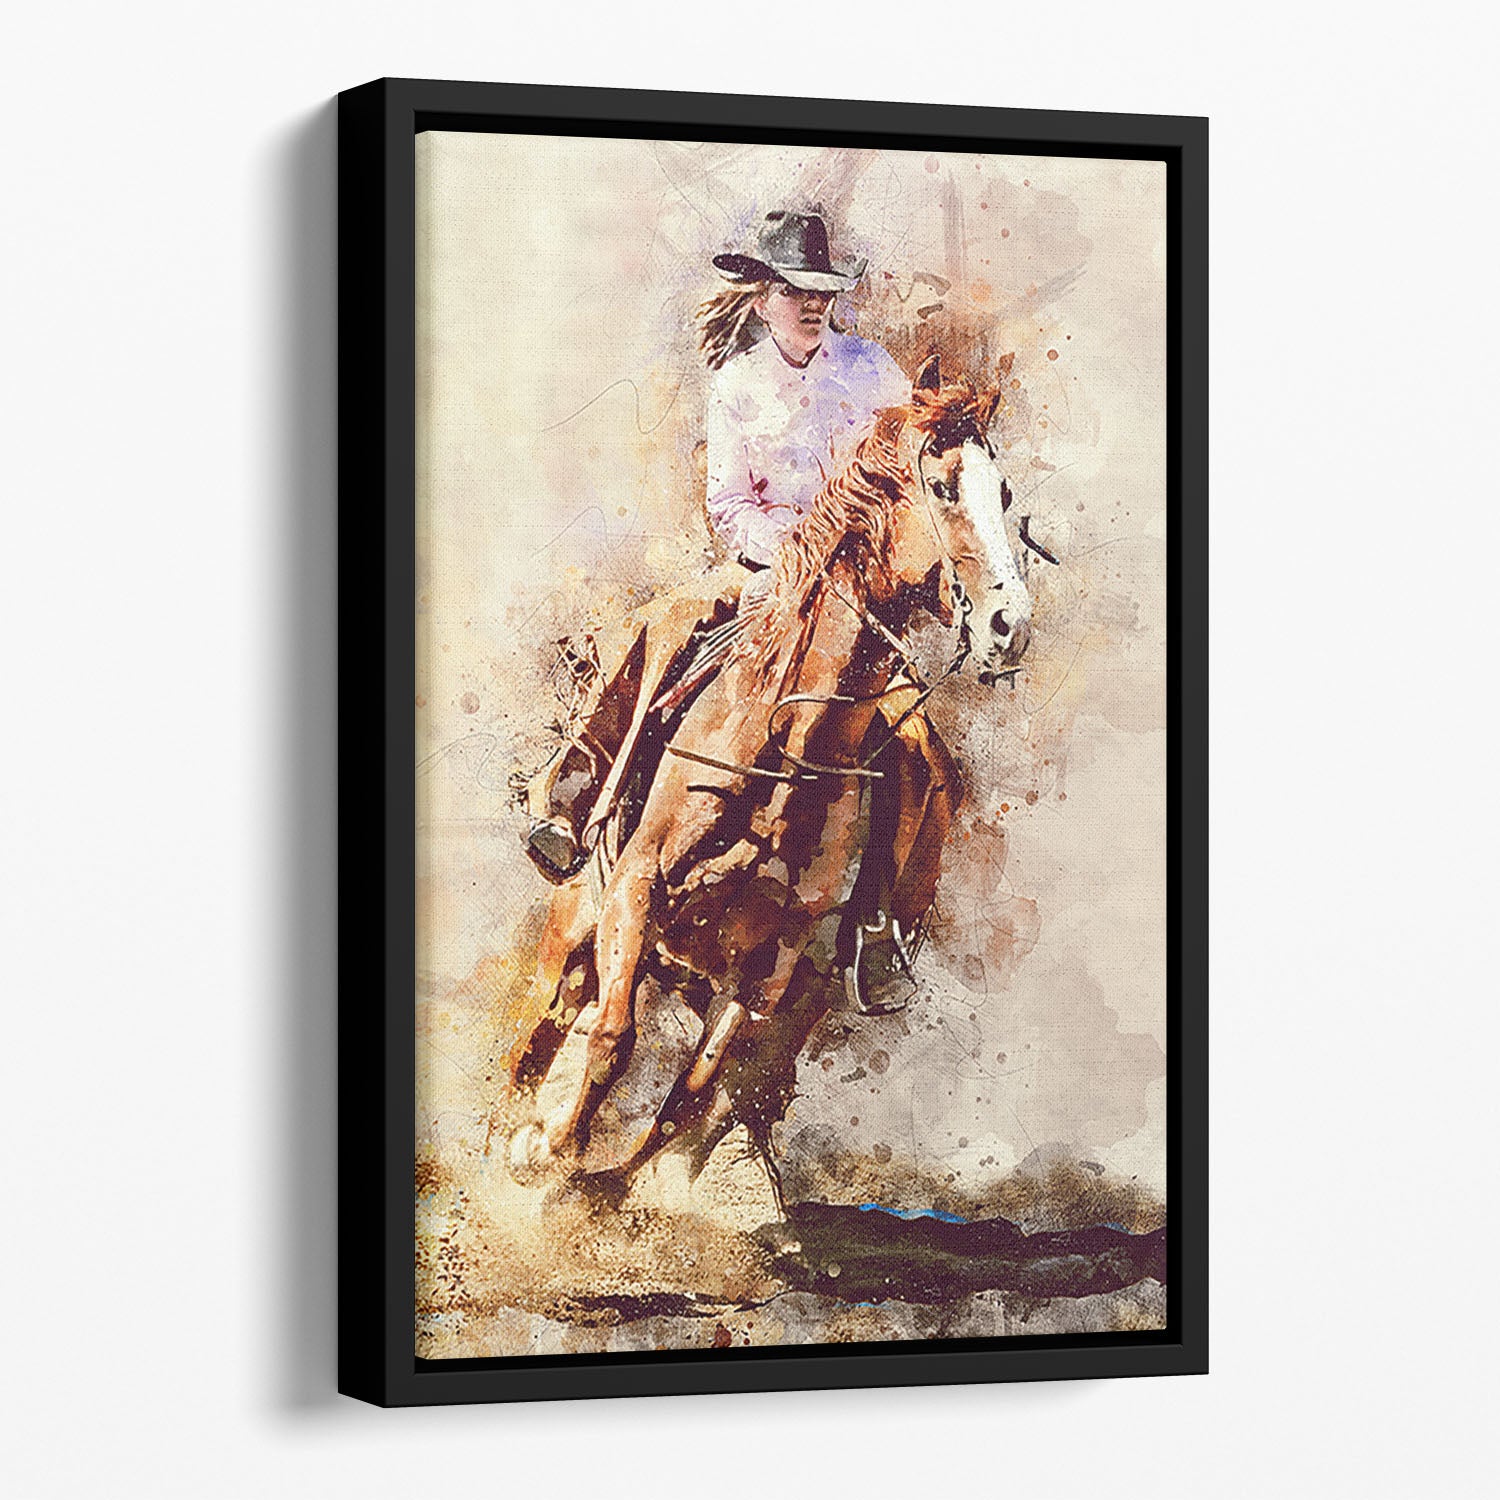 Rodeo Painting Floating Framed Canvas